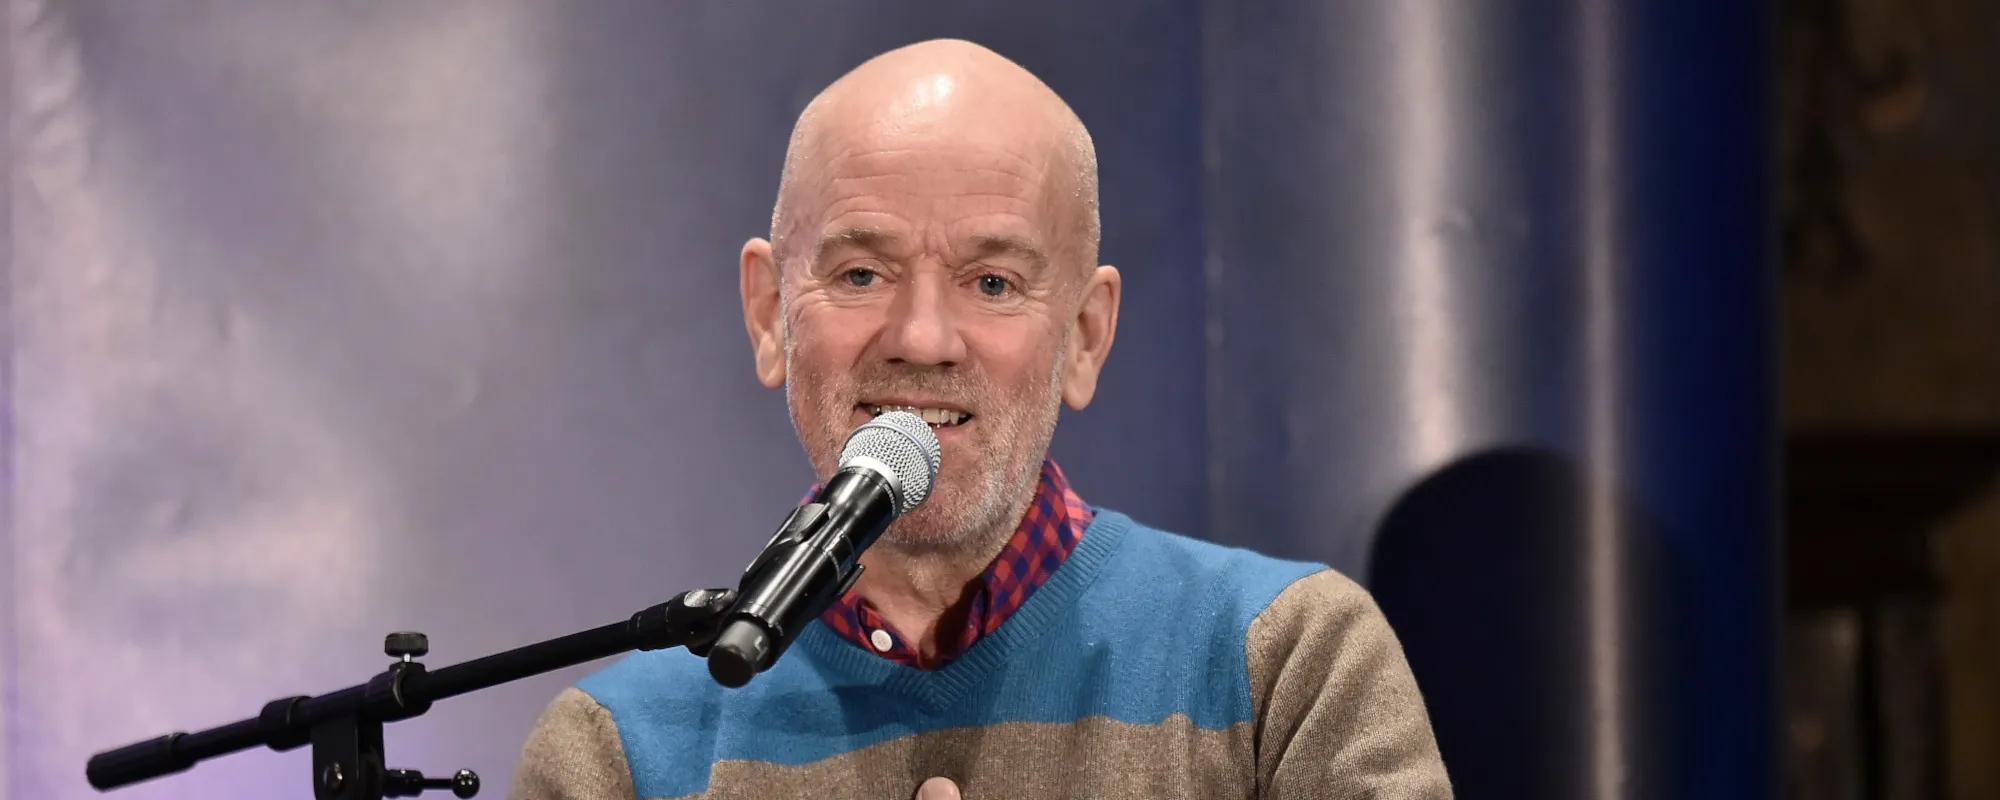 Michael Stipe Revisits “The Last Day Of Our Acquaintance” as Tribute to Sinéad O’Connor